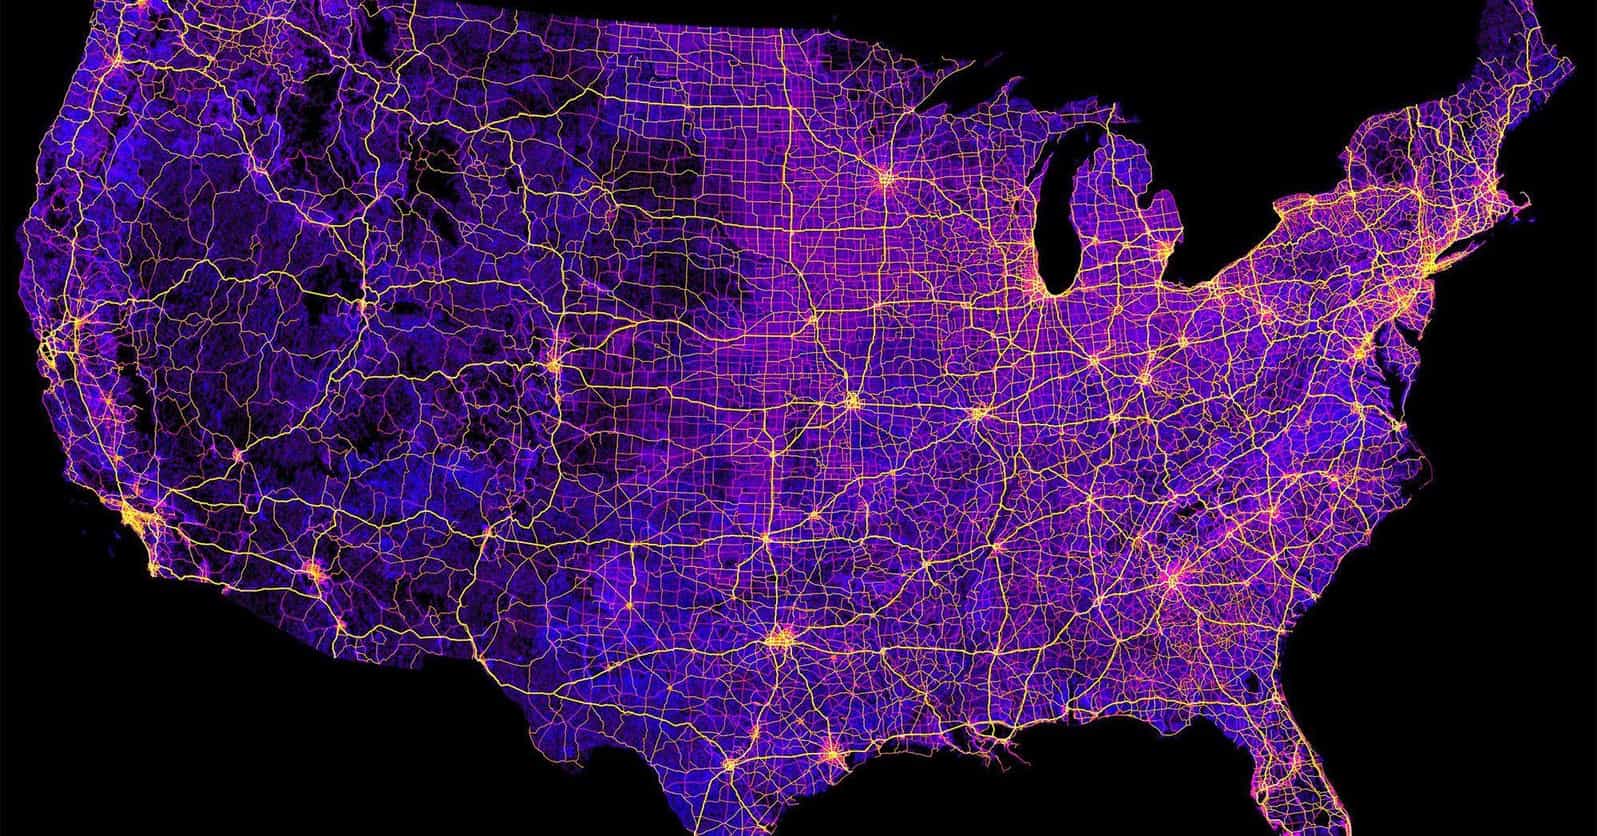 18 Maps Of The United States That Made Us Say 'Whoa'